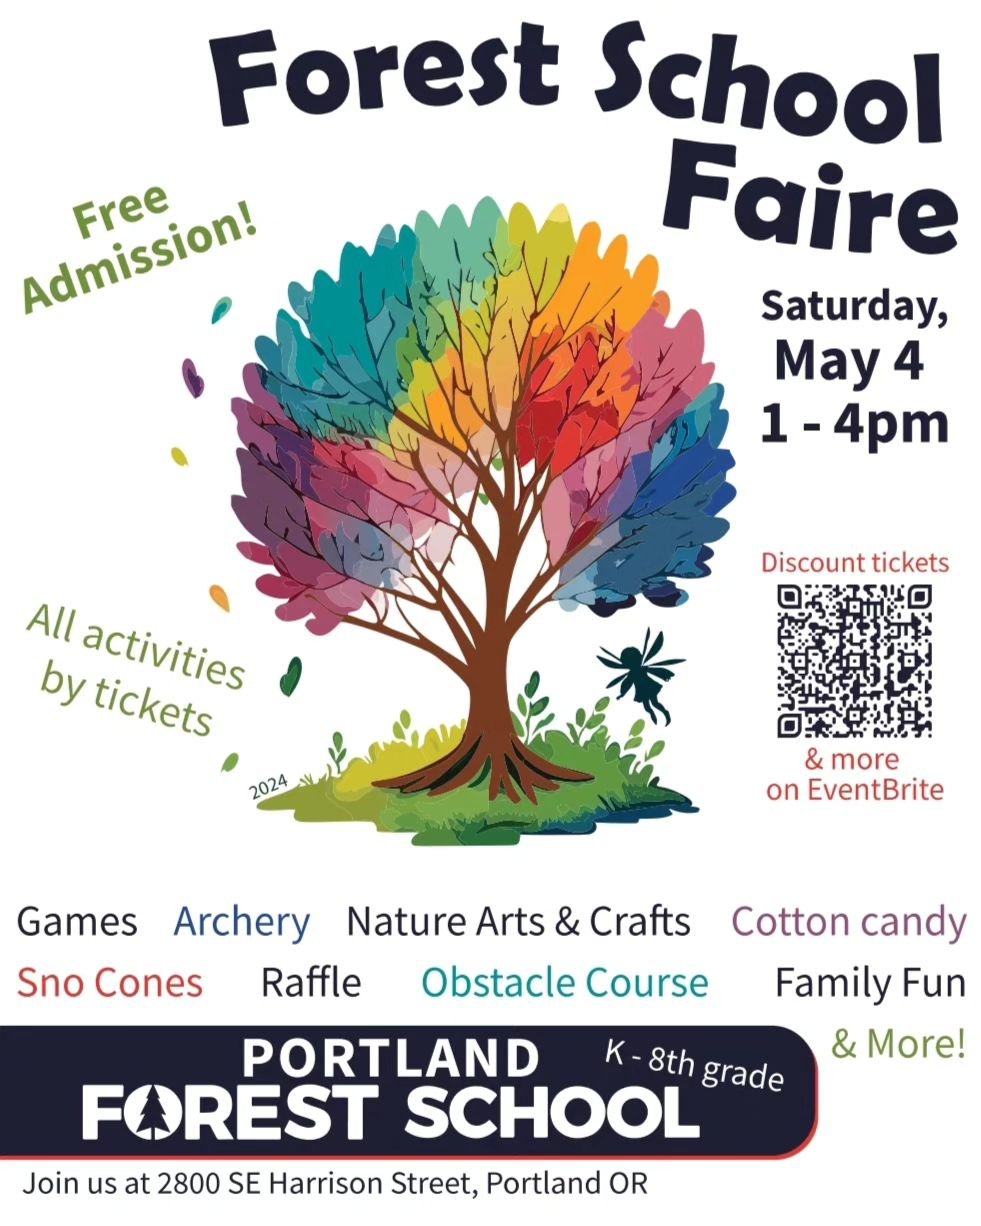 Join us this Saturday,  May 4th from 1-4pm for our #ForestSchoolFaire.  It's a family friendly event! There will be games,  a forest fairy handing out treats,  sno cones, kids vs adults nature quiz show and archery! Visit our online auction as well h